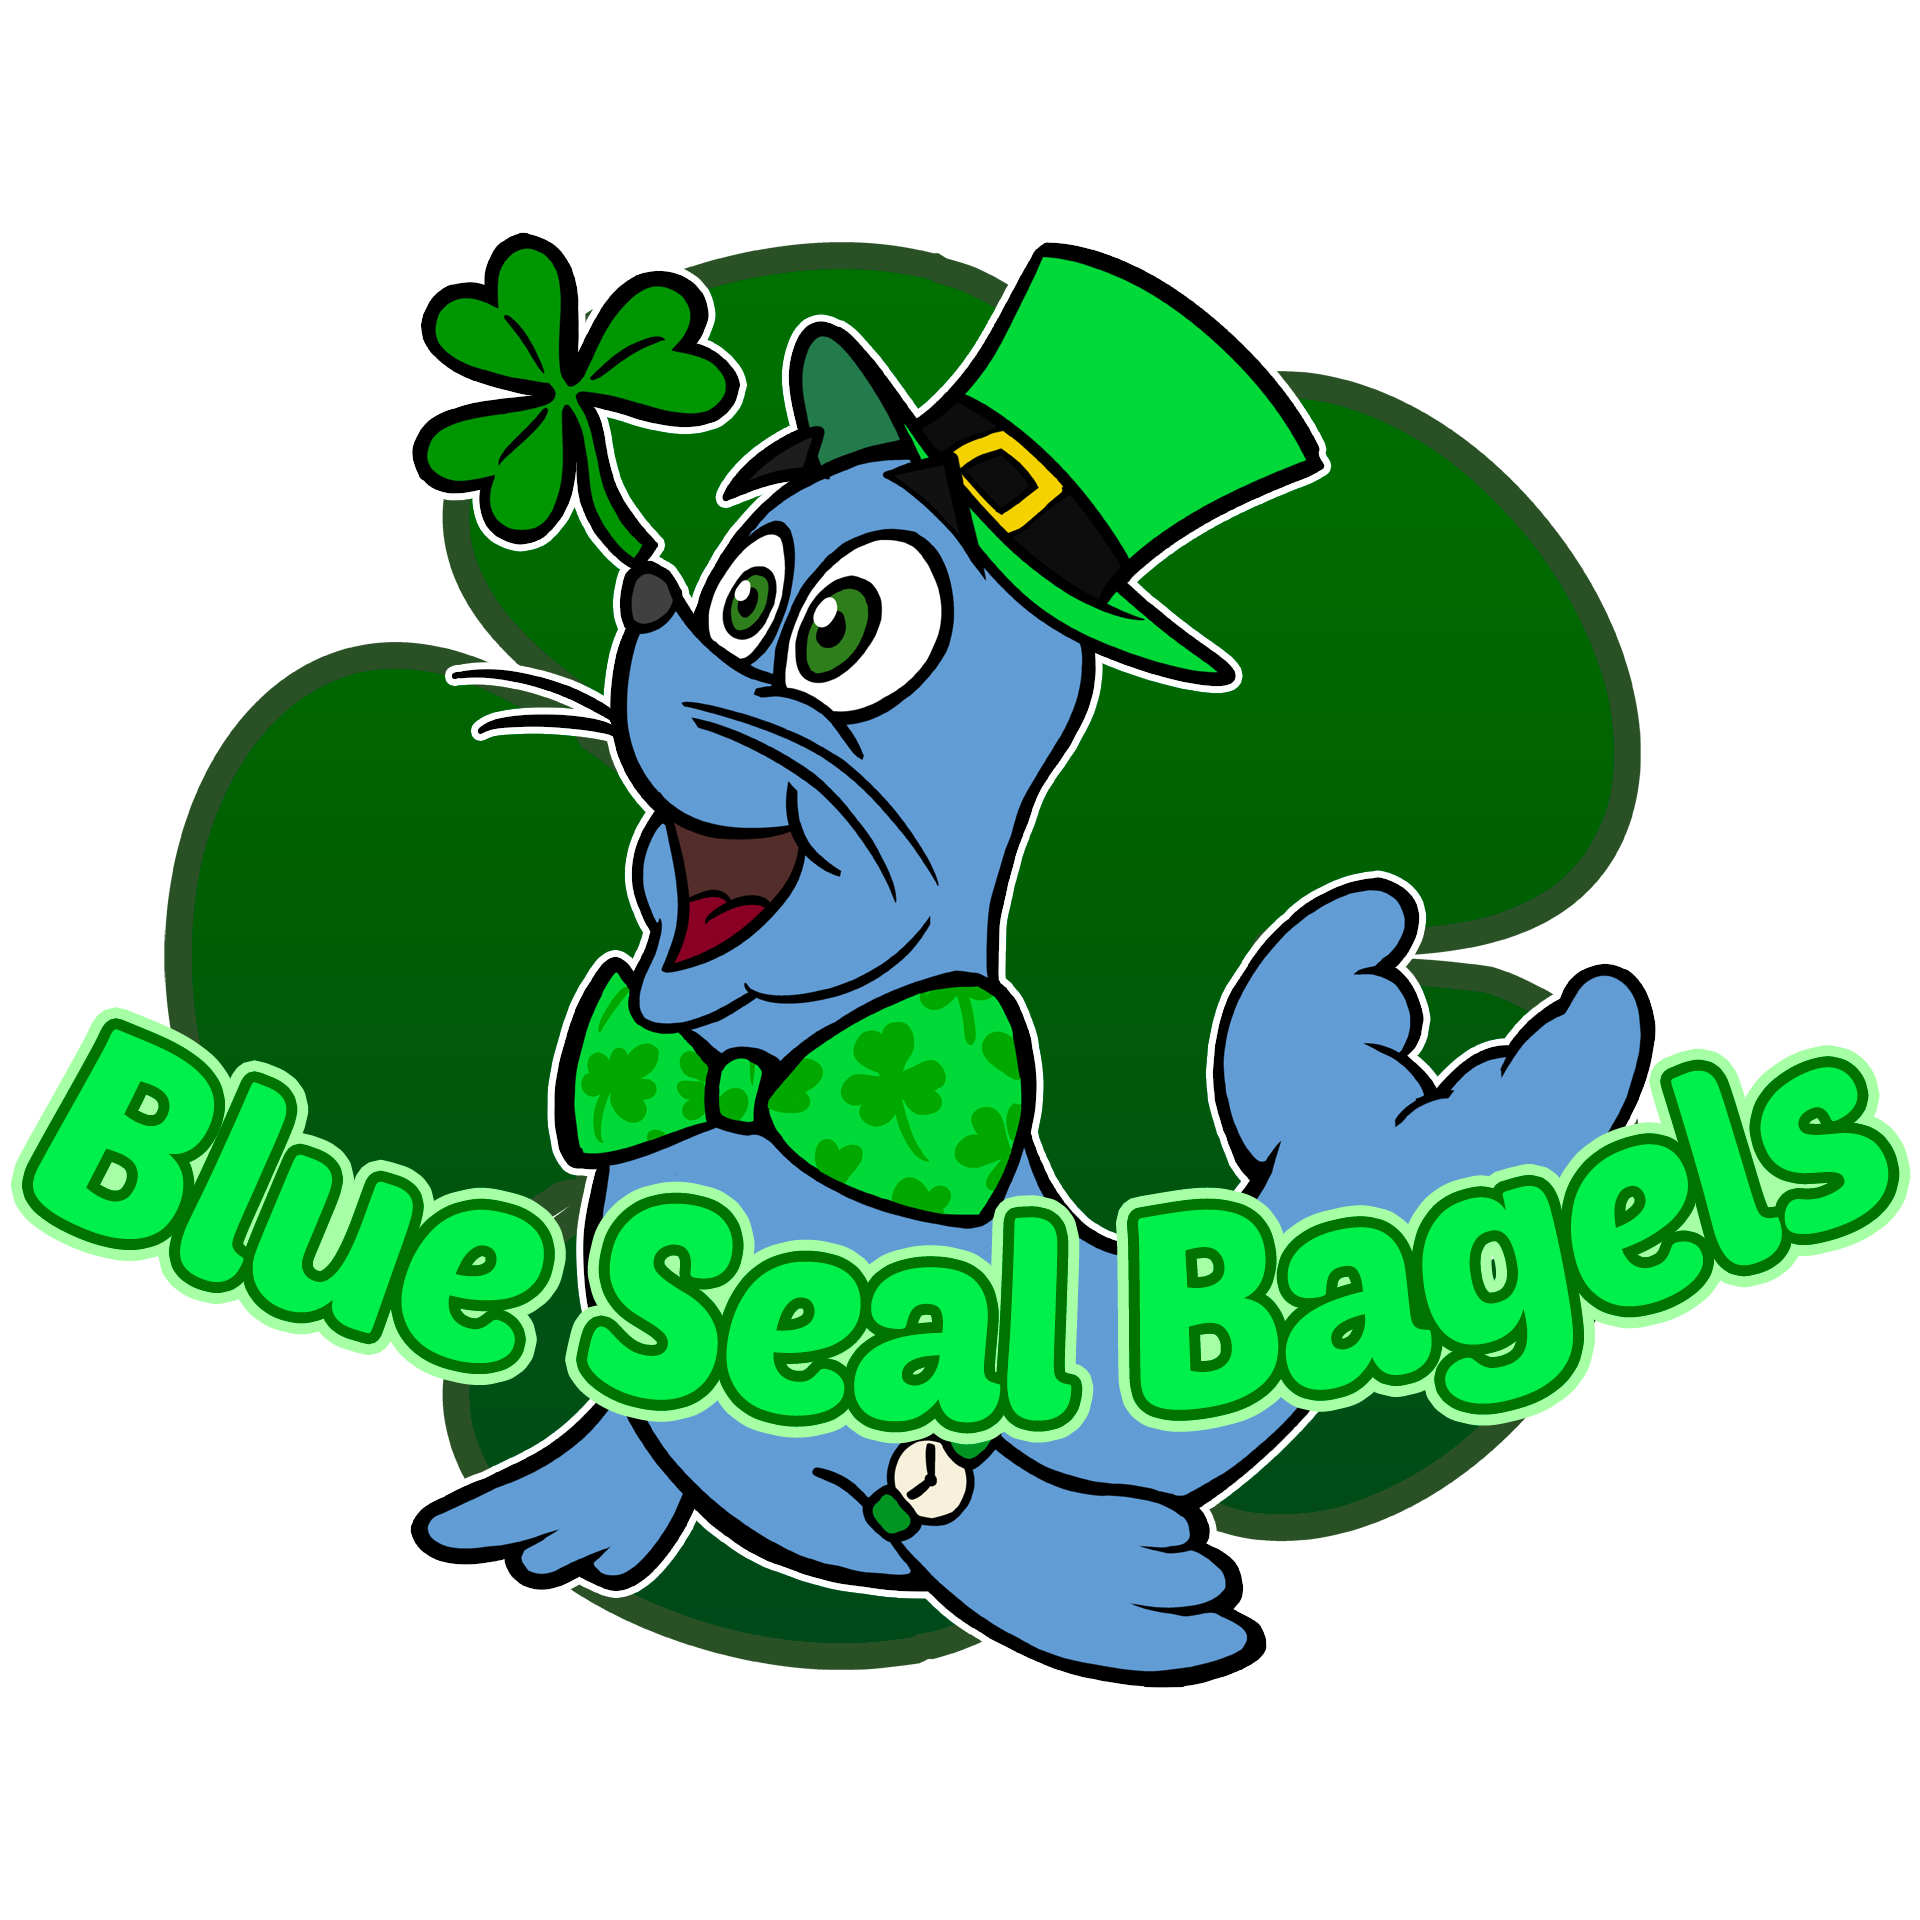 Blue Seal Bagels - Buster St. Patrick's Day